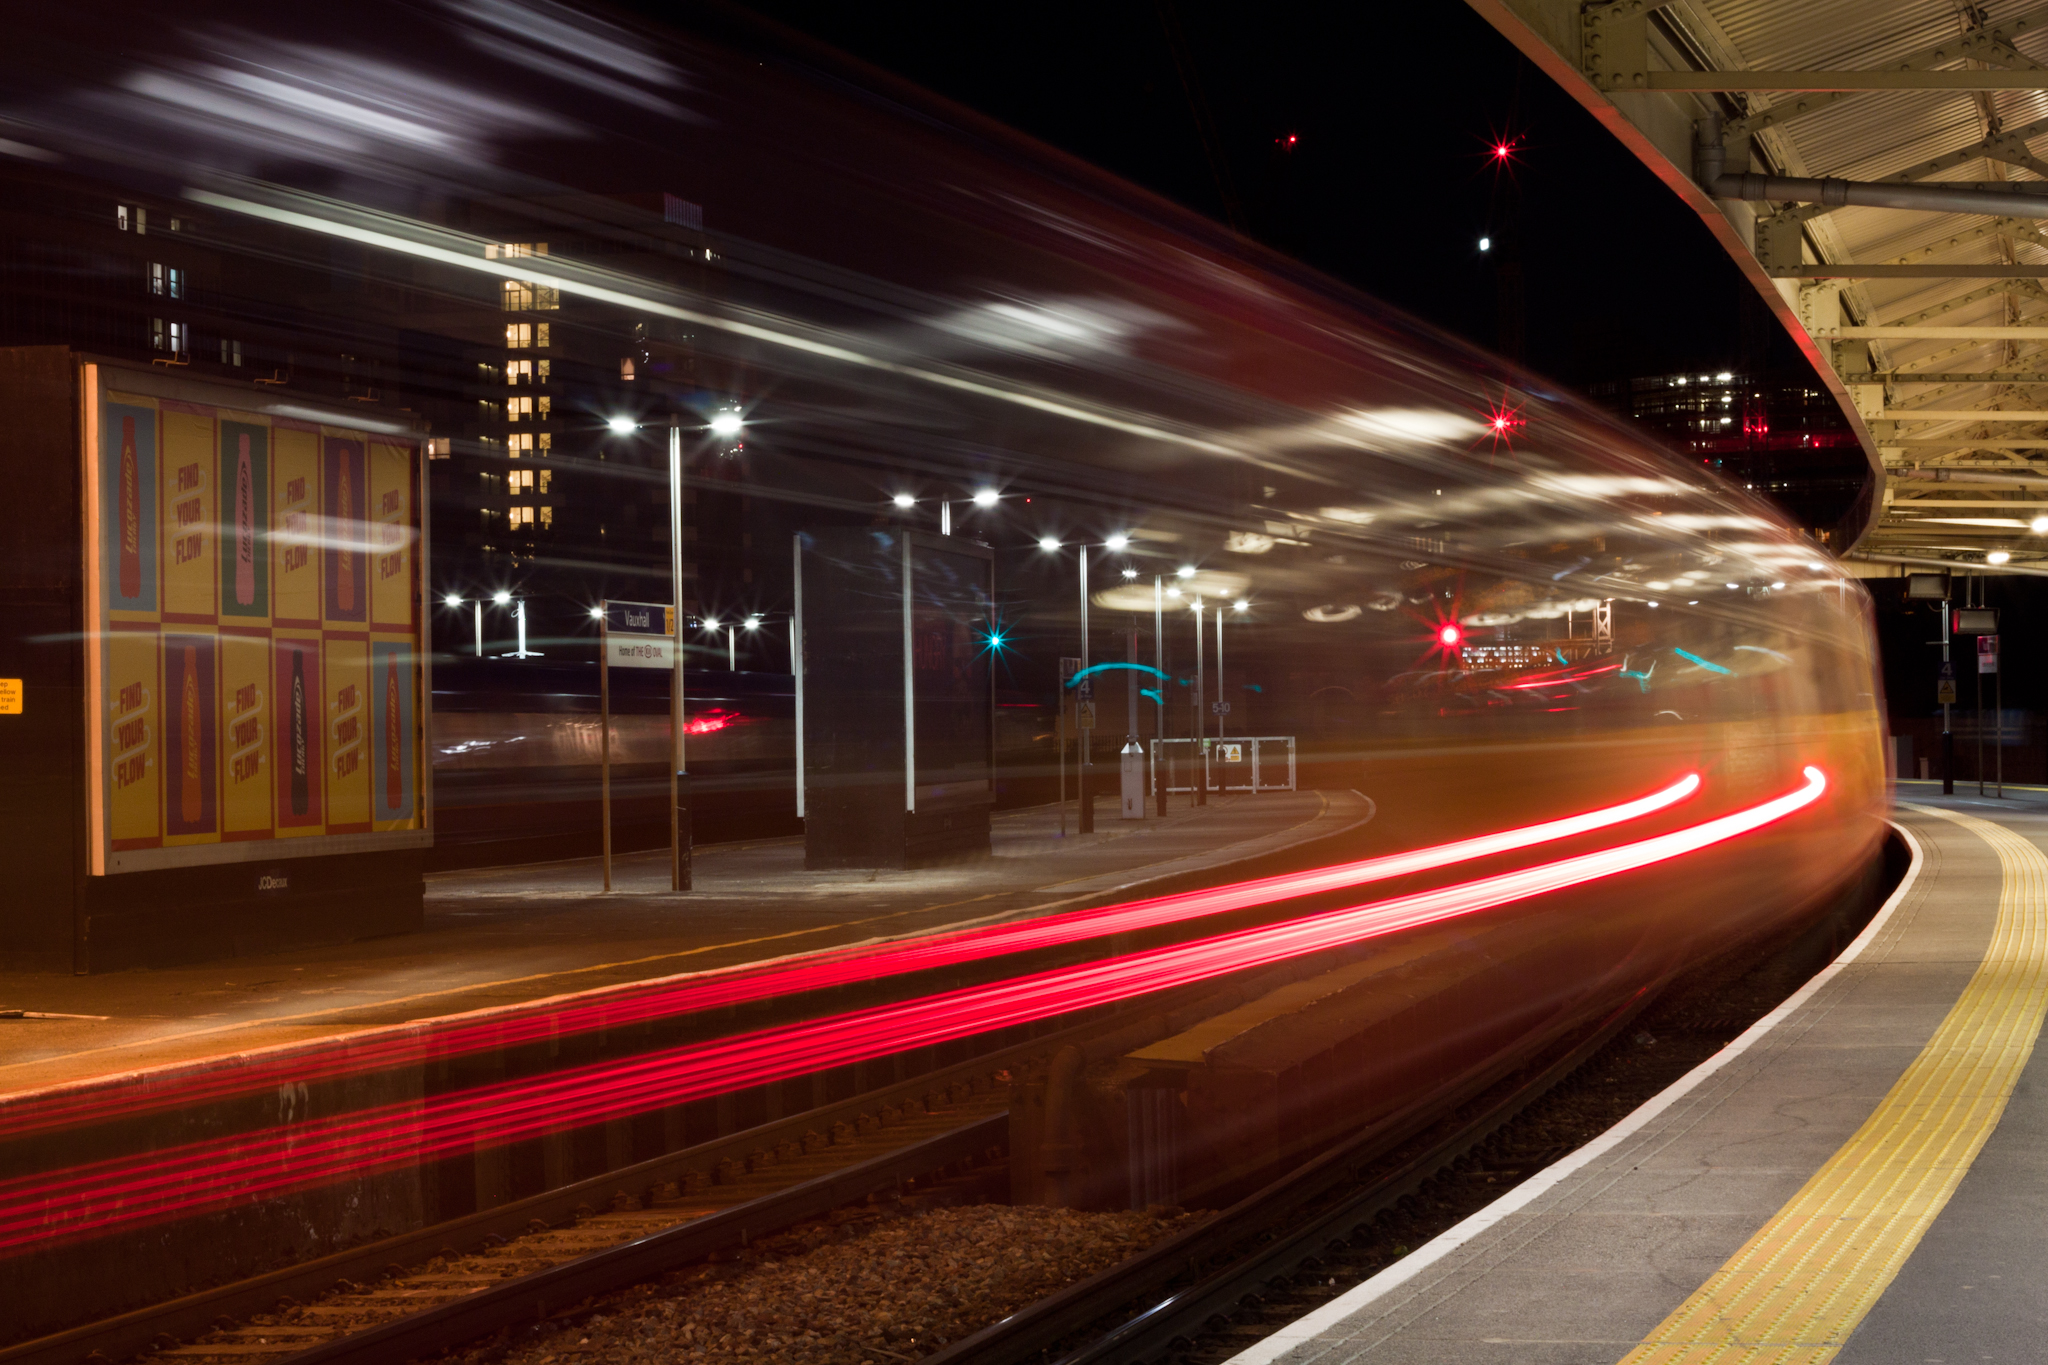  Long exposure when waiting for our delayed train. 